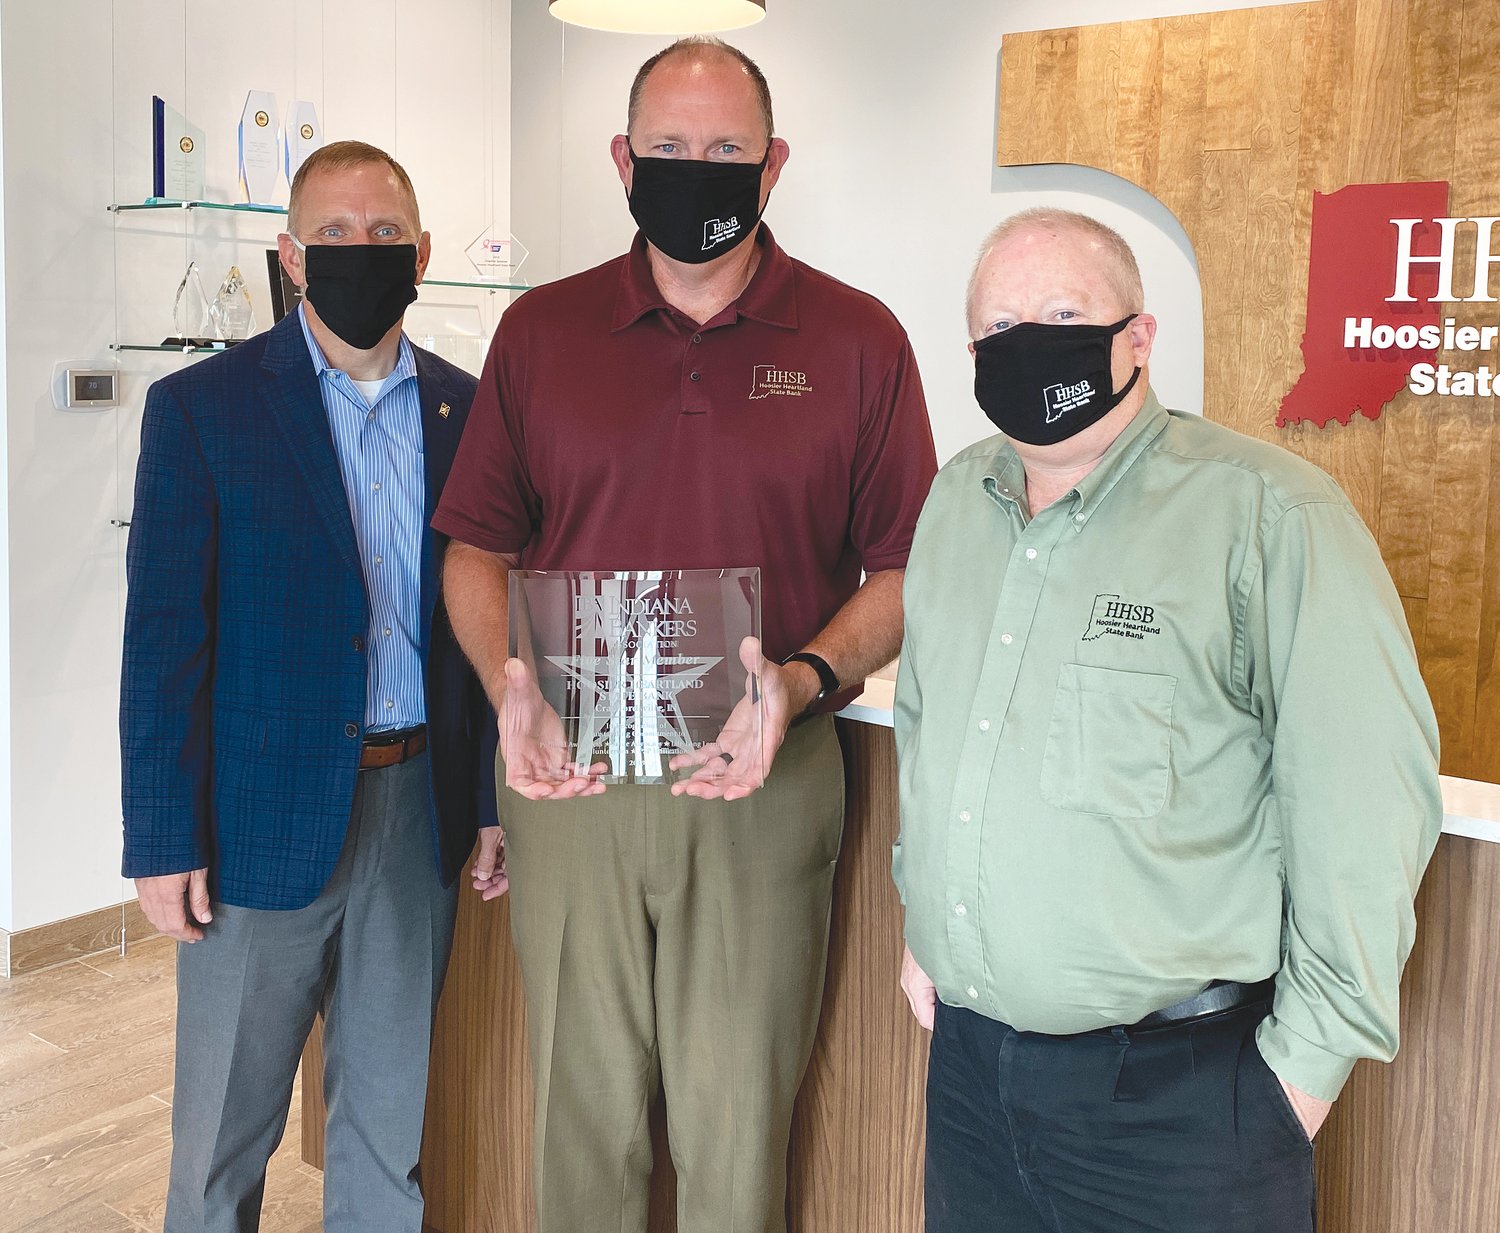 Displaying HHSB’s Five Star Member award from the Indiana Bankers Association are, rom left, IBA Executive Vice President Rod Lasley, President Brad Monts and CEO Trey Etcheson.